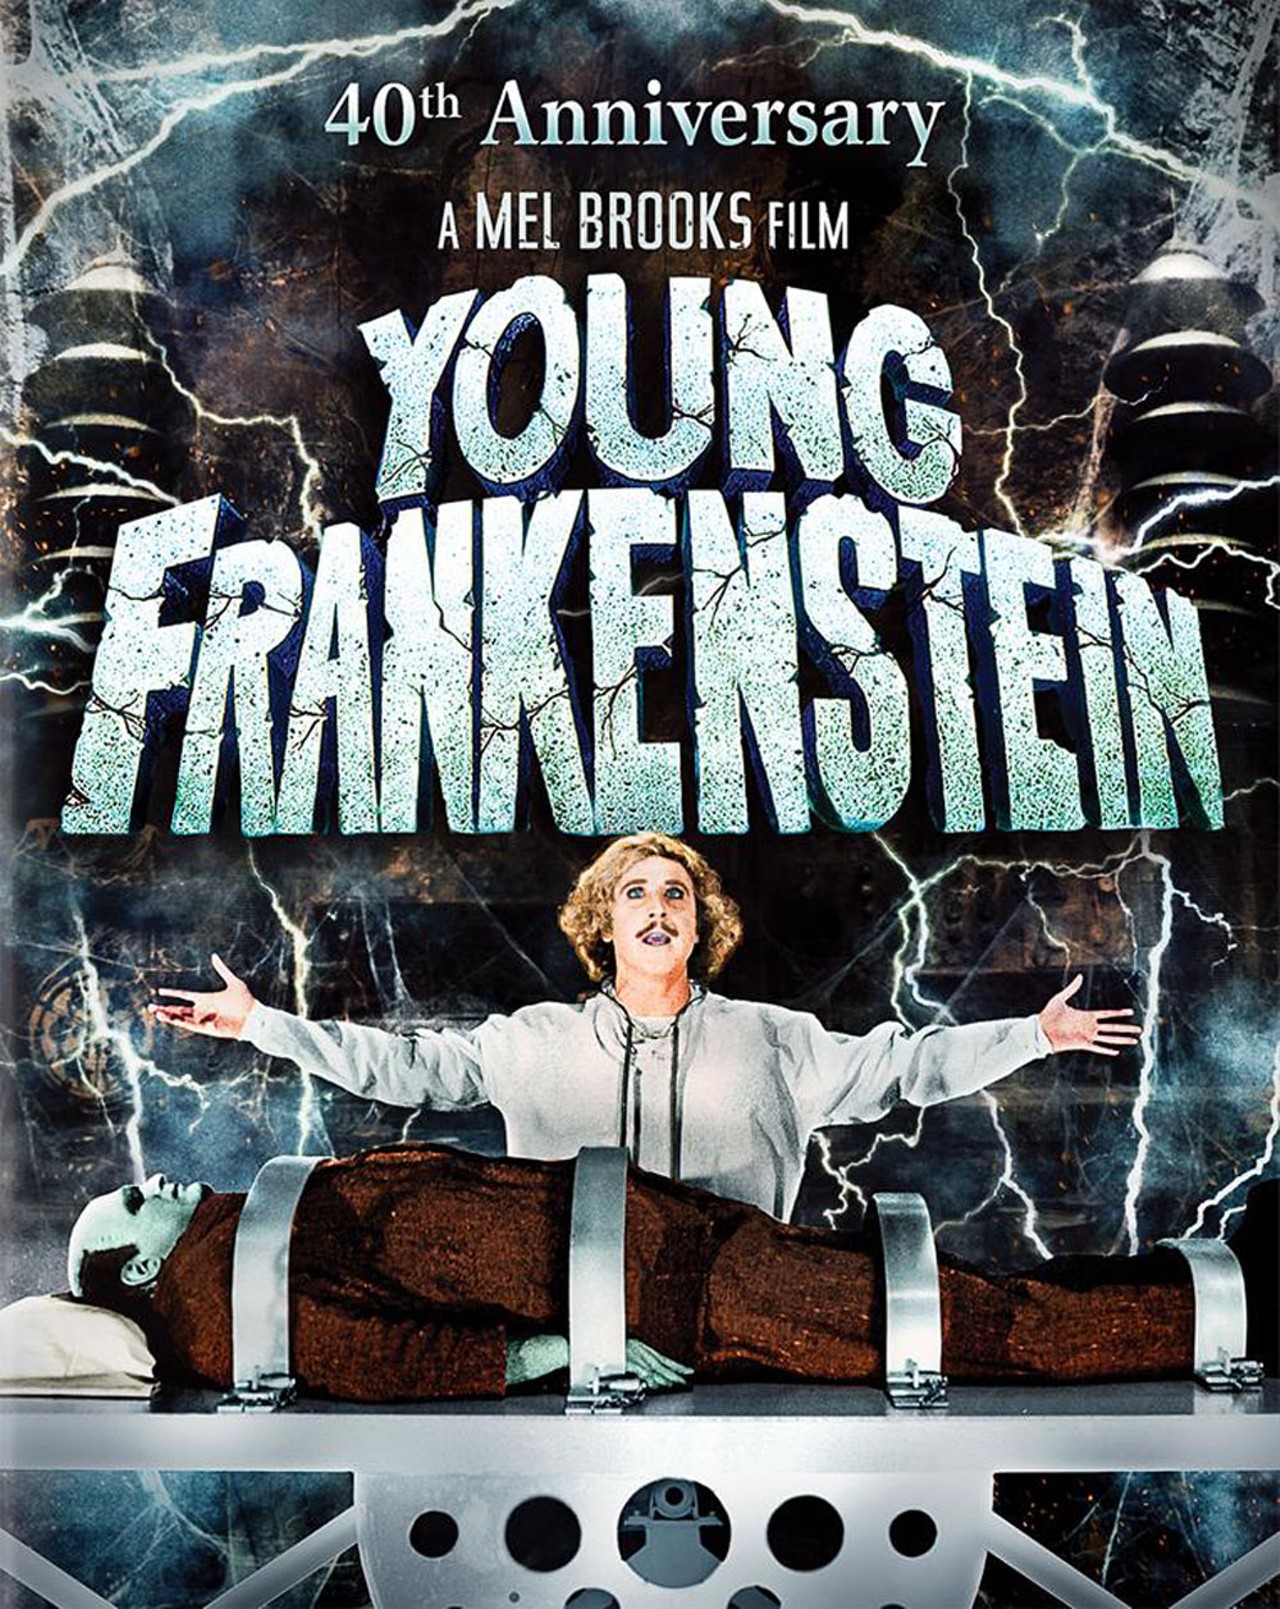 Sunday, 10/23
Young Frankenstein
@ The Redford Theatre
Every film lover is still mourning the death of the great Gene Wilder, but those same people need to go see Mel Brooks&#146; now-classic horror spoof, Young Frankenstein. If this movie is beloved to you, as it is to many Mel Brooks fanatics, you need to go see it on a movie screen. If you&#146;ve never seen this movie, you&#146;re missing out big time. Both sets of people deserve to see Dr. Frederick Frankenstein (Wilder) perform &#147;Puttin&#146; on the Ritz&#148; with the Monster (Peter Boyle). The cast for this movie is stellar as a whole, featuring Cloris Leachman, Madeline Kahn, Richard Haydn, and Marty Feldman at their finest. If you&#146;re looking for a good laugh and to cope a little bit more with the loss of Wilder, go check out this showing. 
The film starts at 8 p.m.; 17360 Lahser Rd., Detroit; redfordtheatre.com; Tickets are $5.